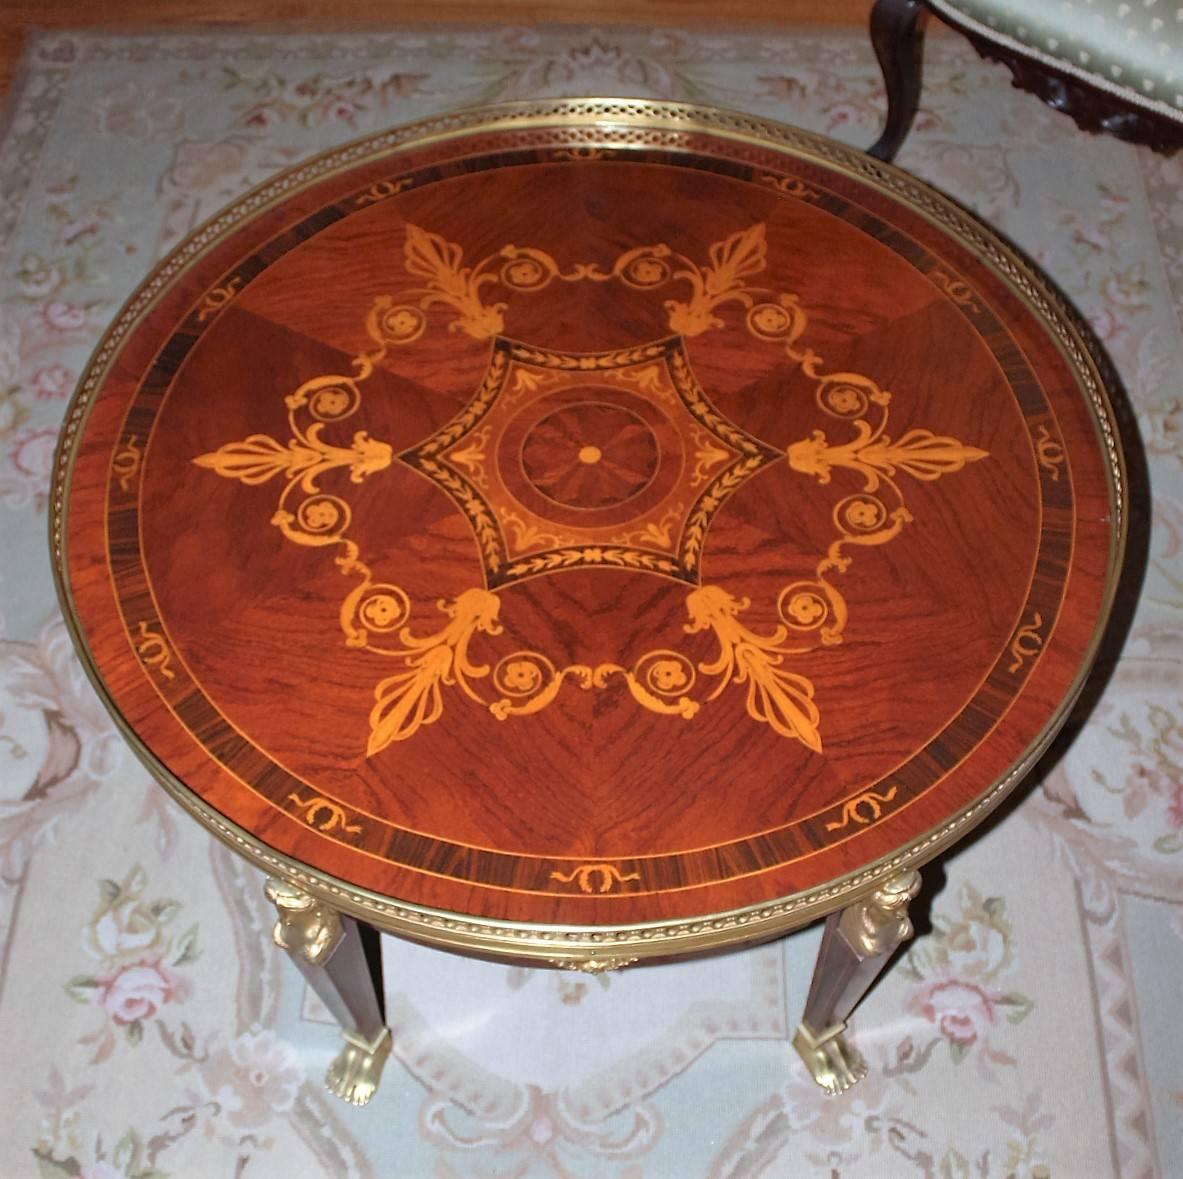 Elaborately inlaid coffee table with galley top in the French Empire style. This piece was custom-made in New Orleans for a specific client and was cabinetmaker made in the French Quarter.